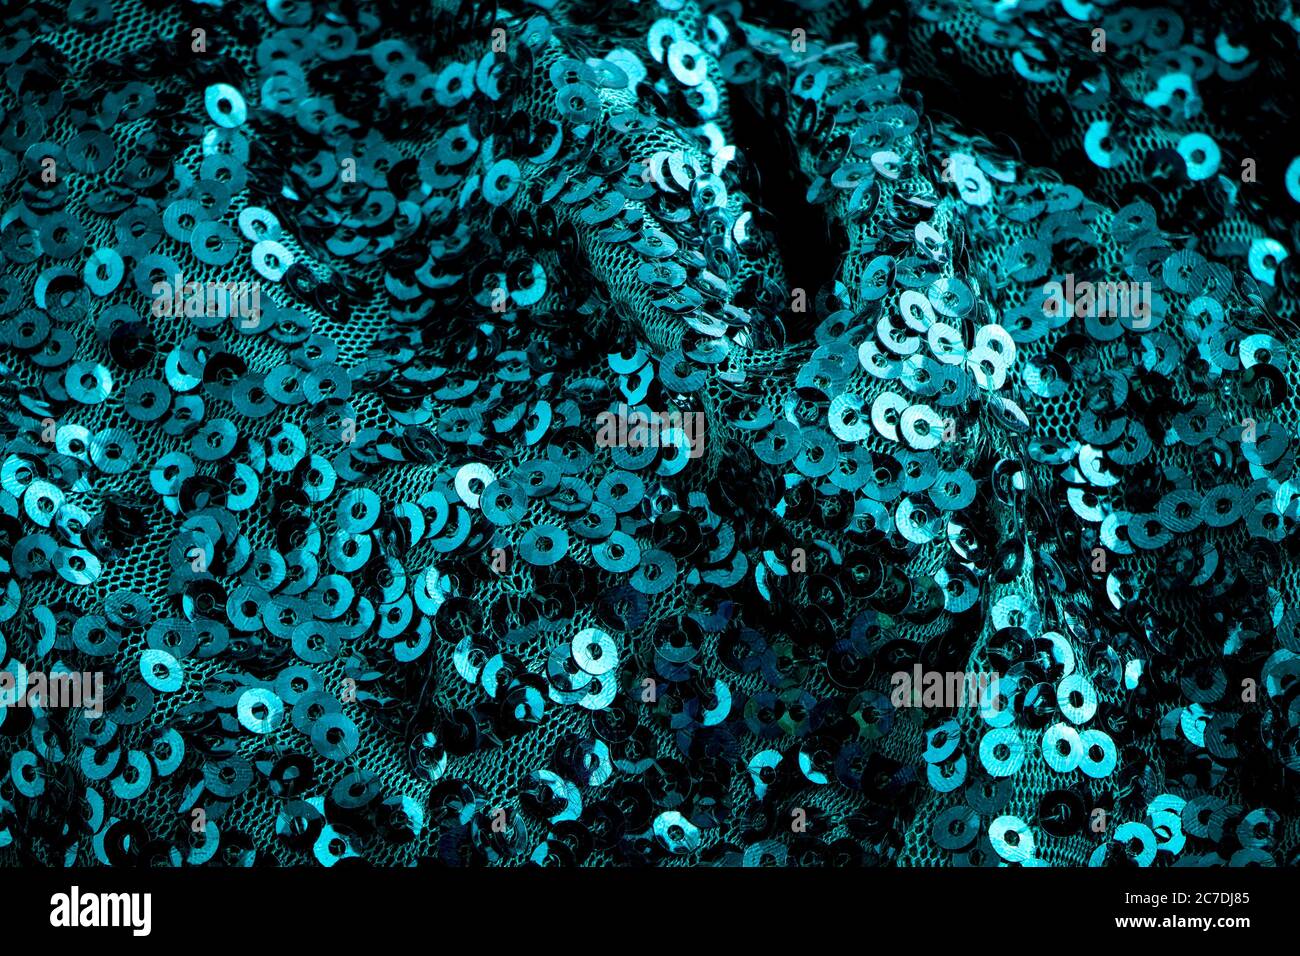 Turquoise shimmer sequined textured fabric Stock Photo